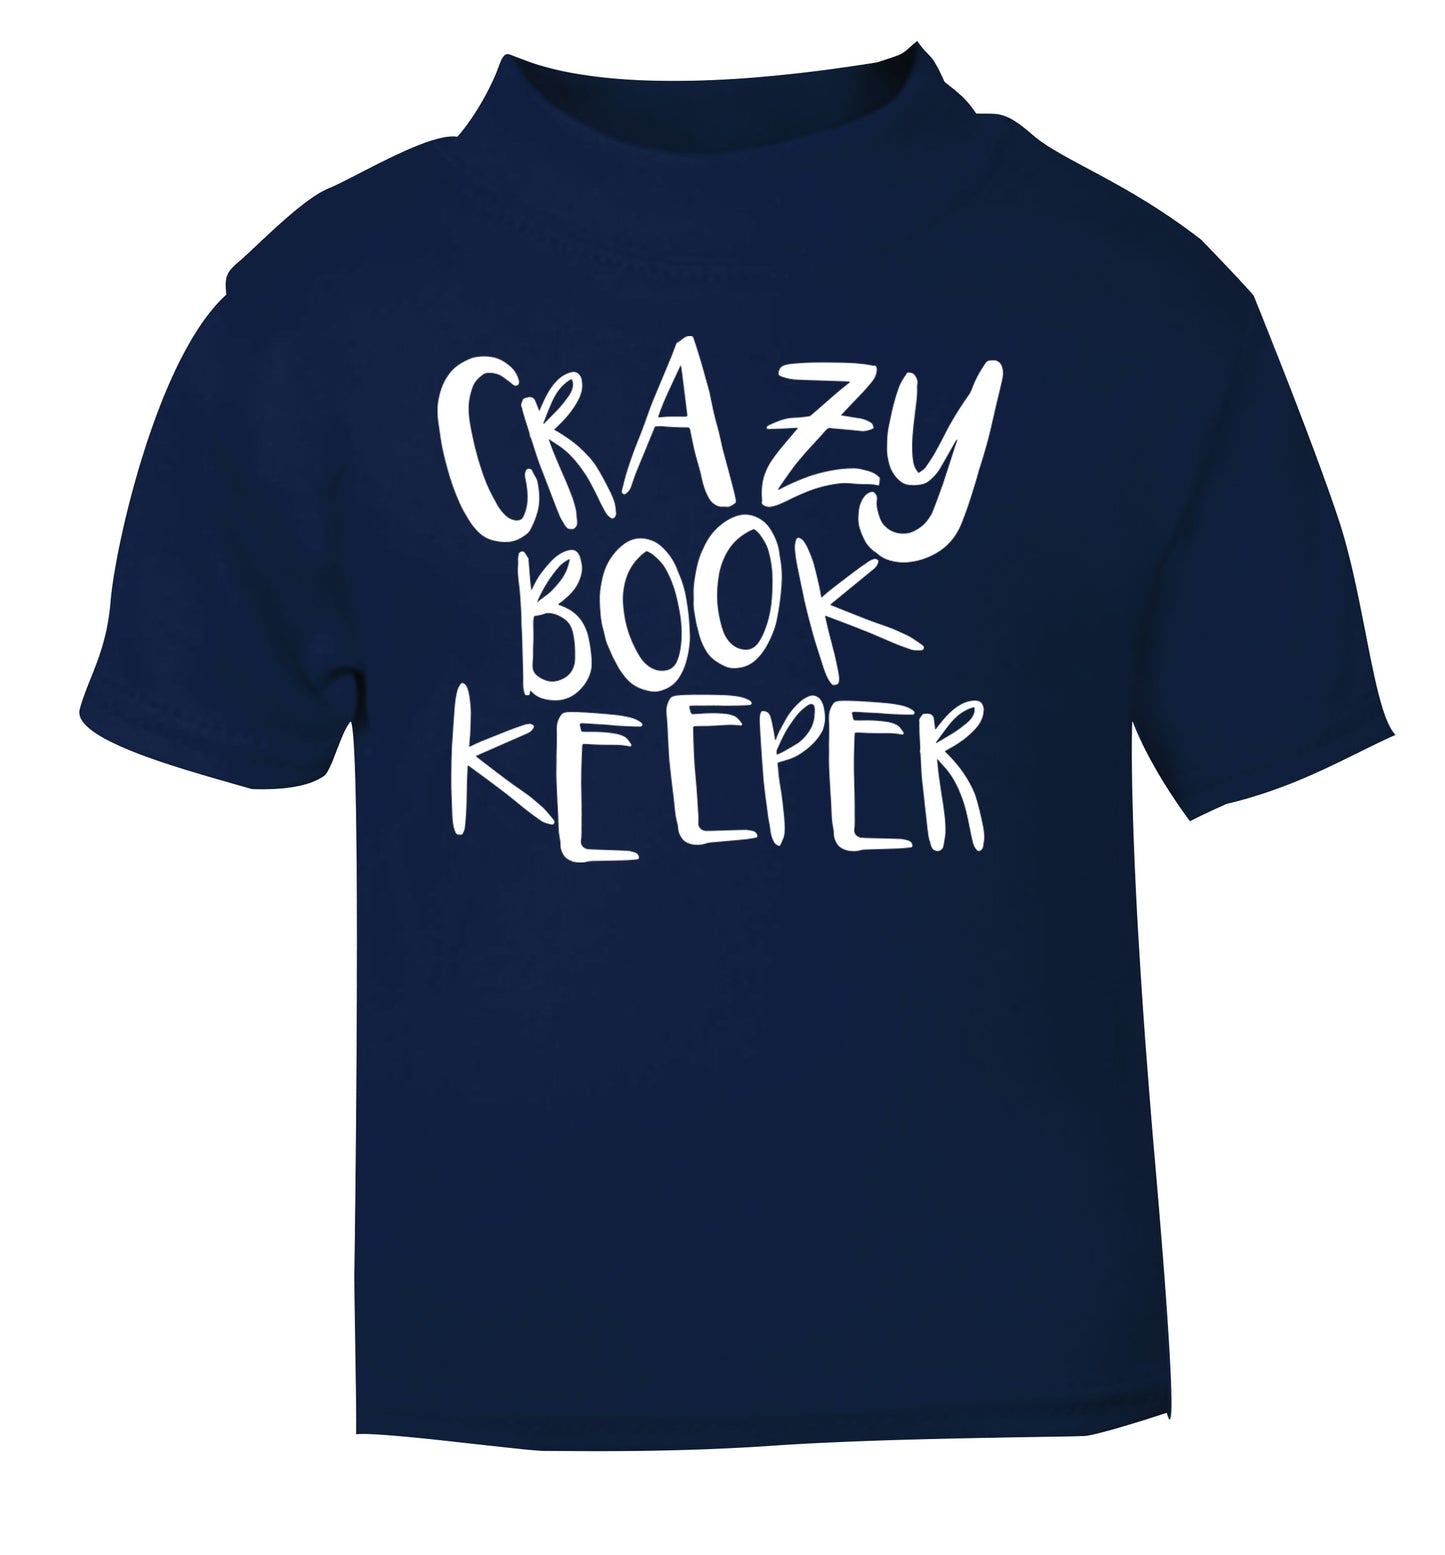 Crazy bookkeeper navy Baby Toddler Tshirt 2 Years